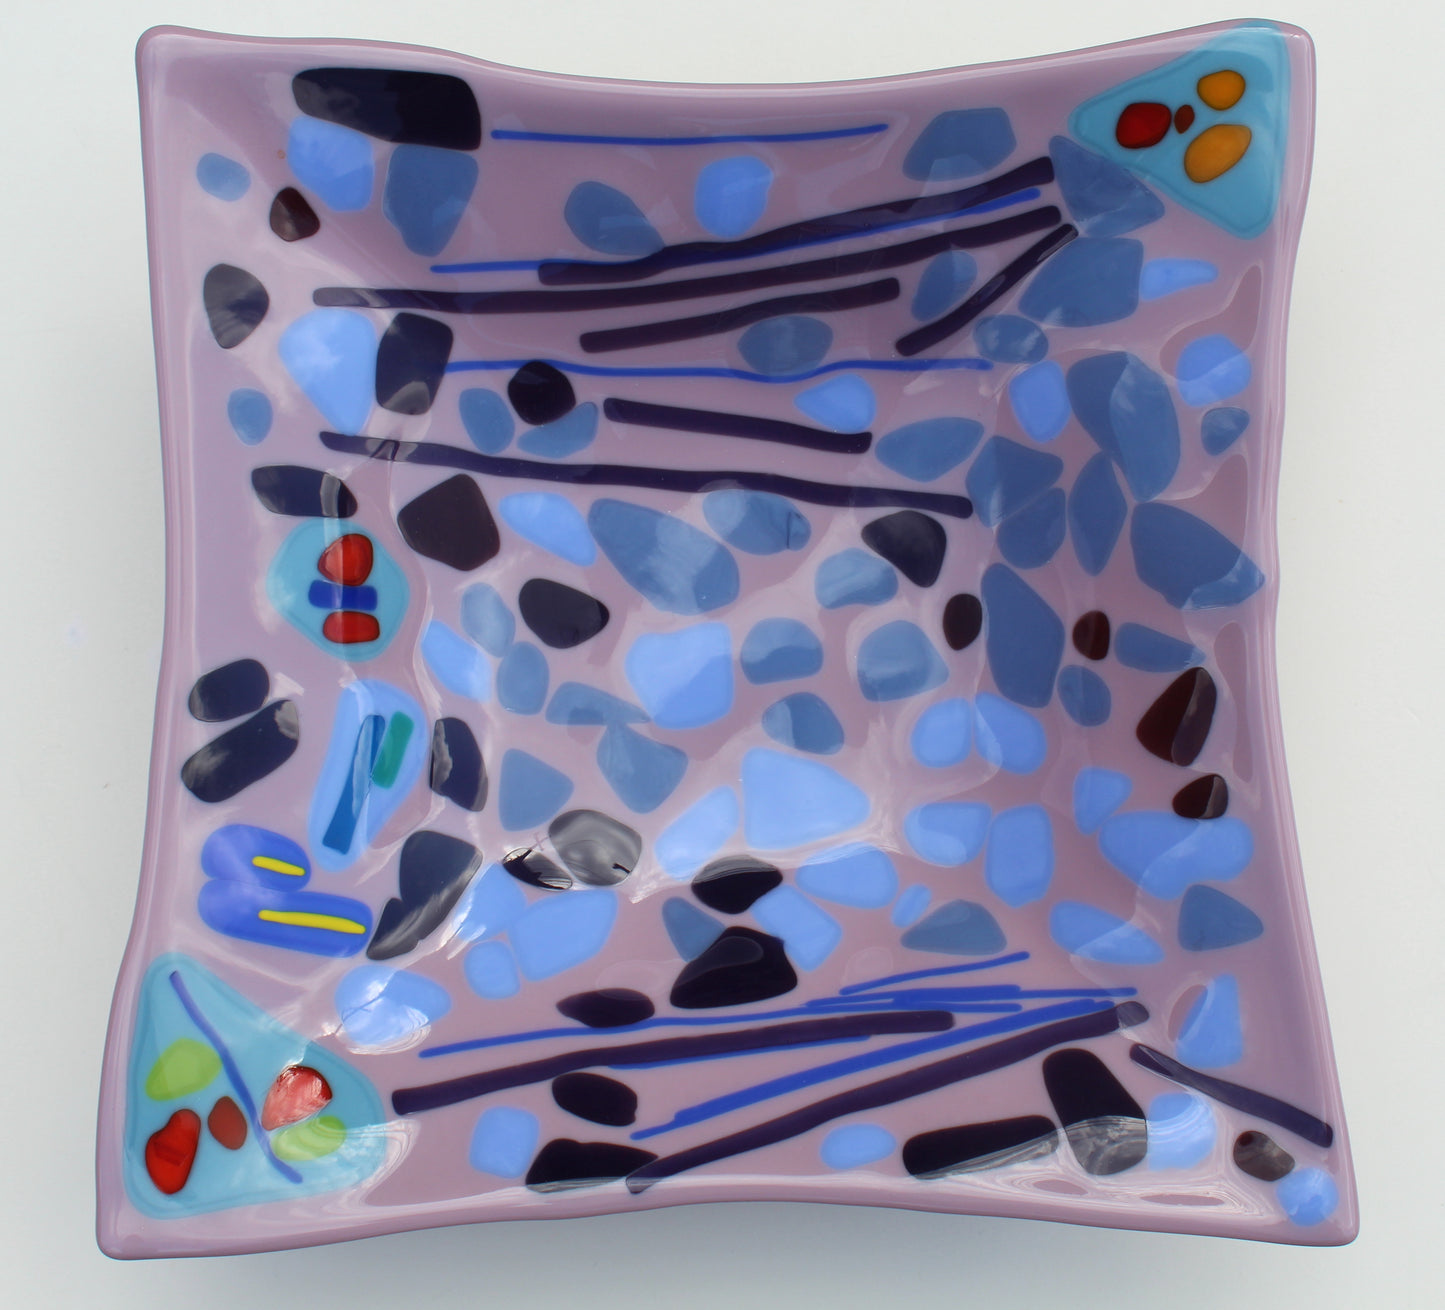 This is a square purple glass art with abstract black, blue, yellow and red shapes